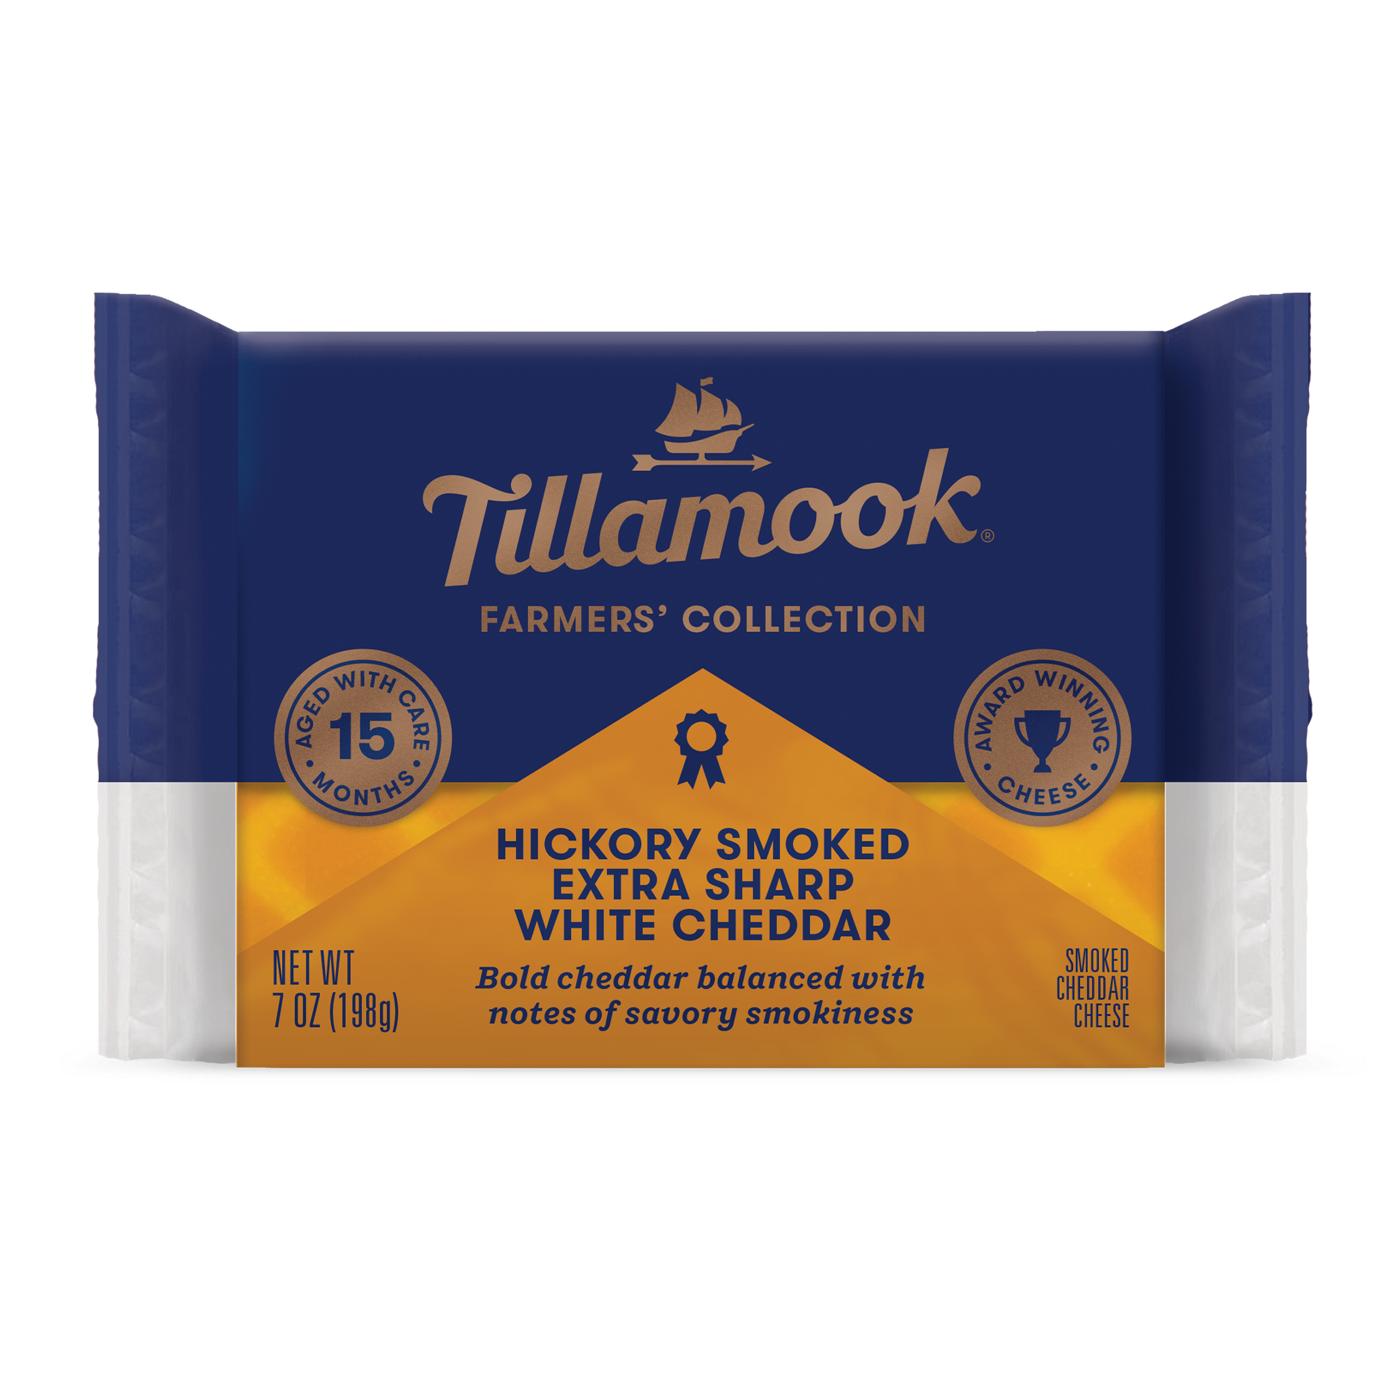 Tillamook Farmers' Collection Hickory Smoked Extra Sharp White Cheddar Cheese; image 1 of 6